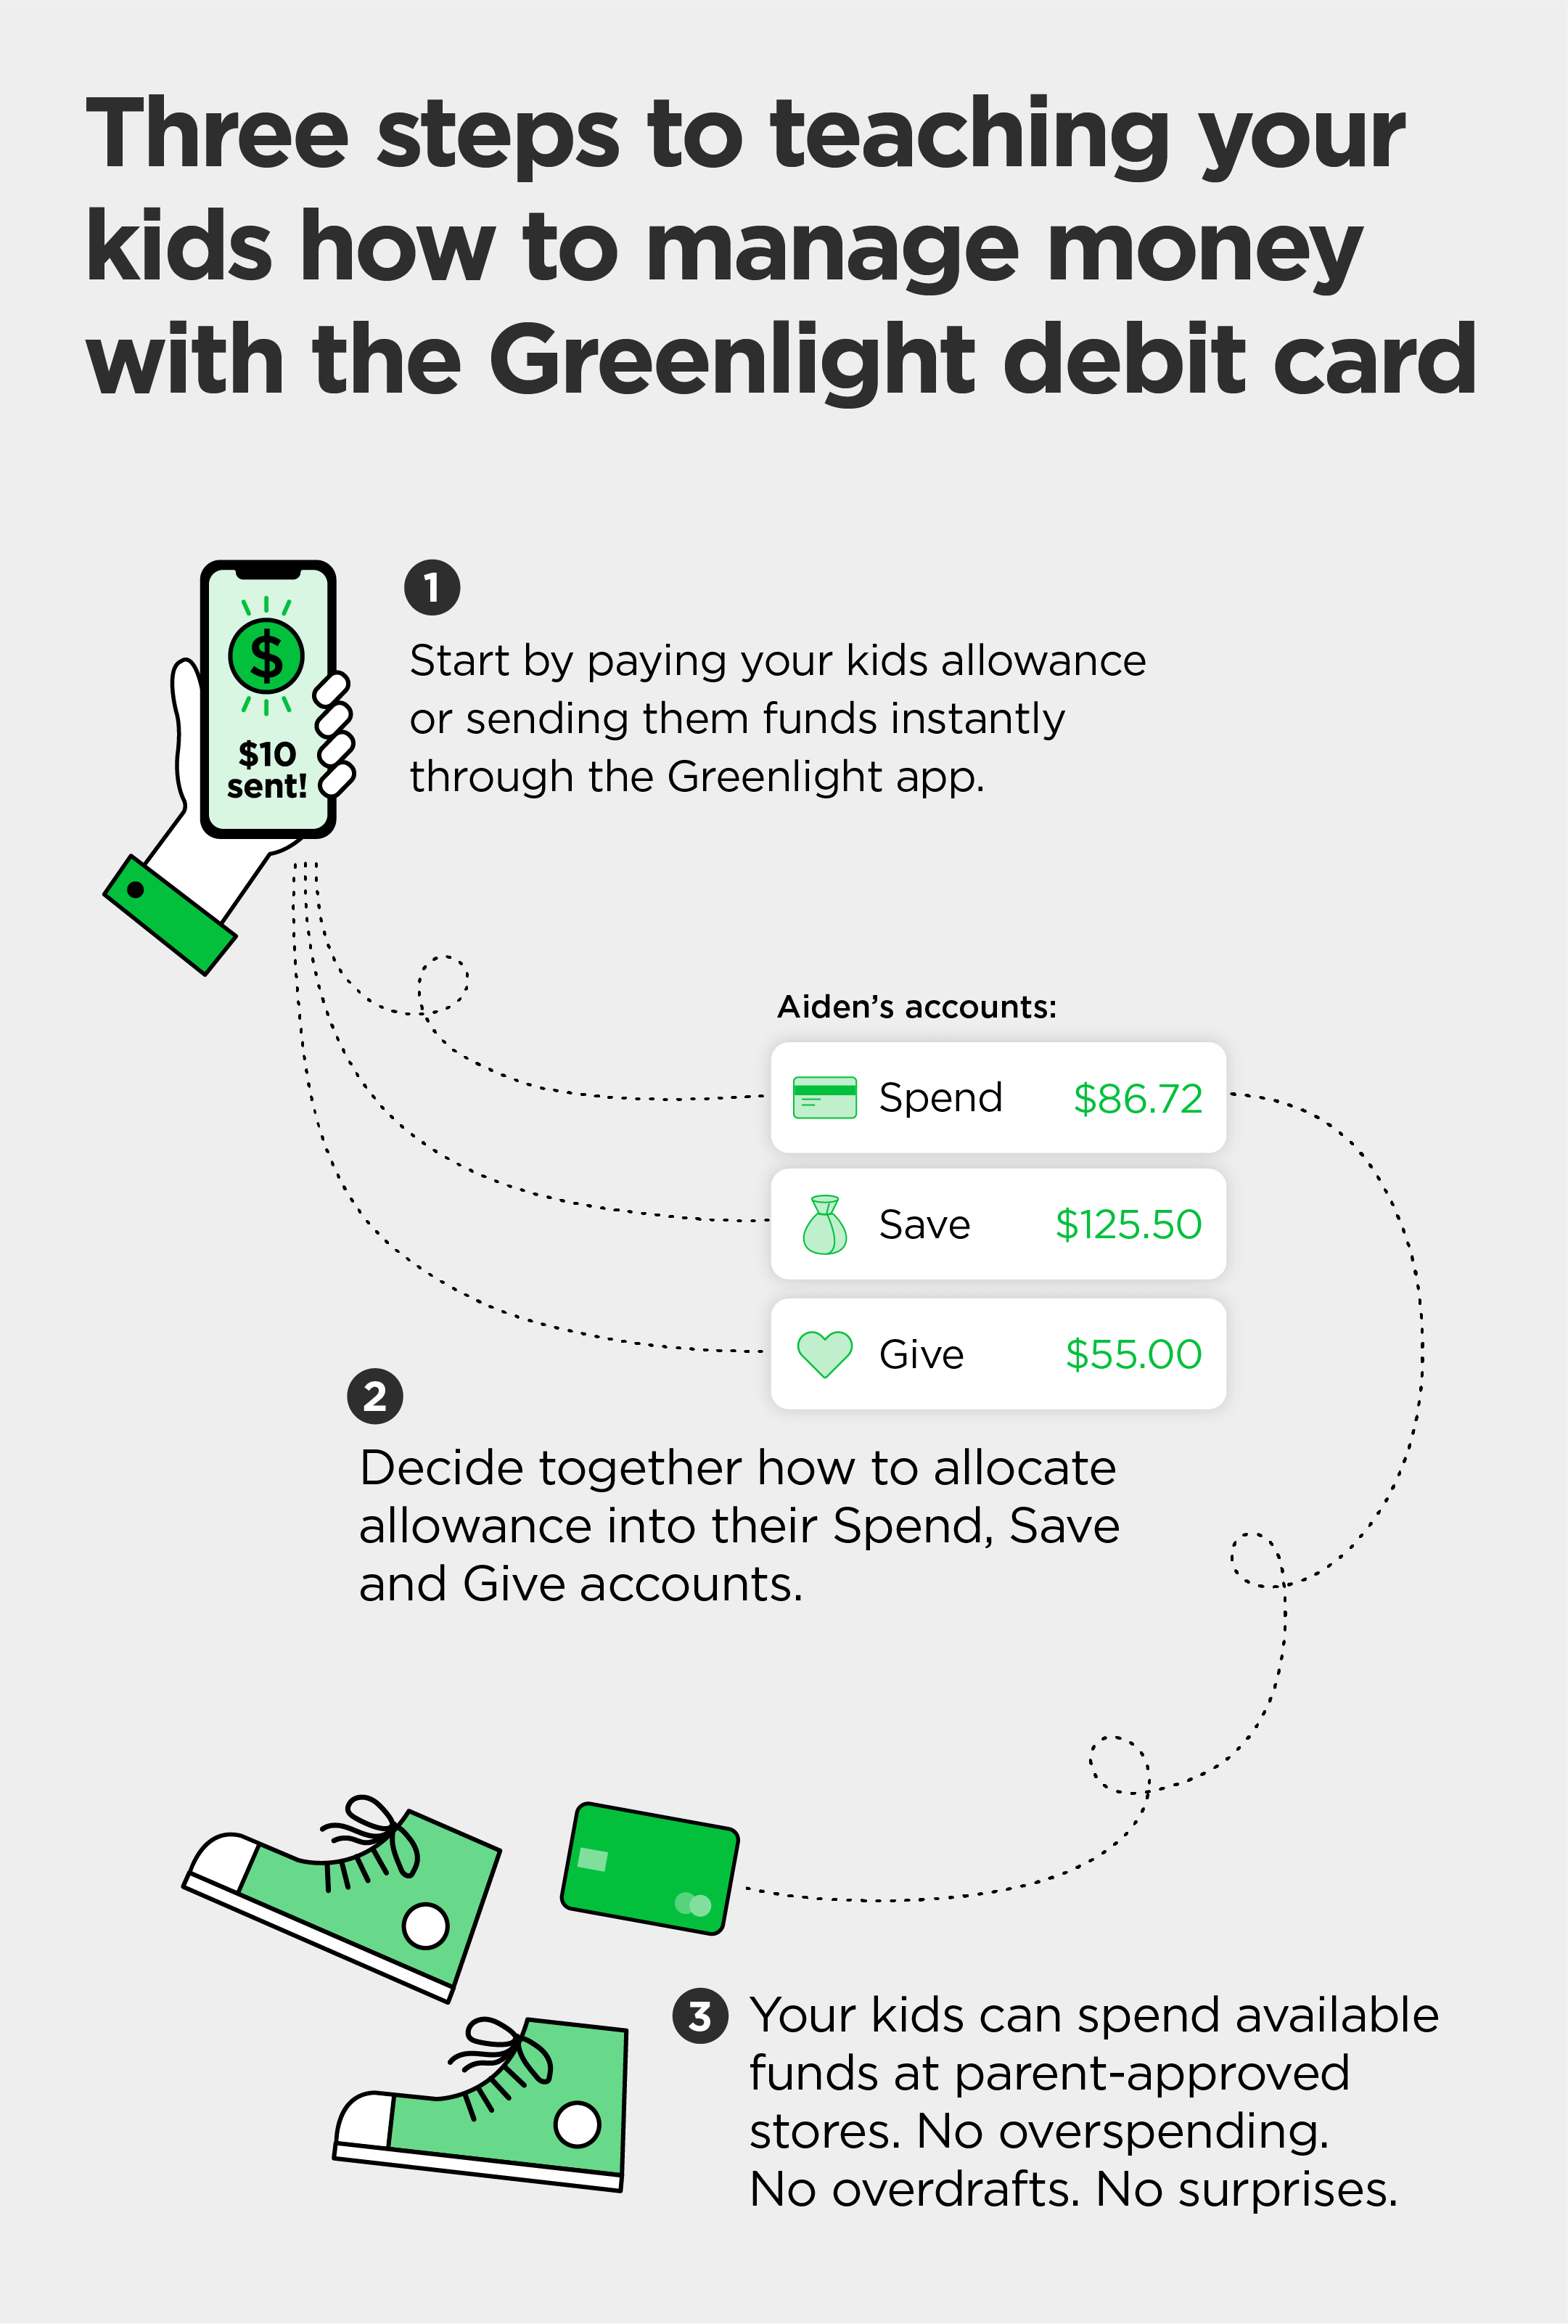 three steps to teaching your kids how to manage money with the Greenlight debit card